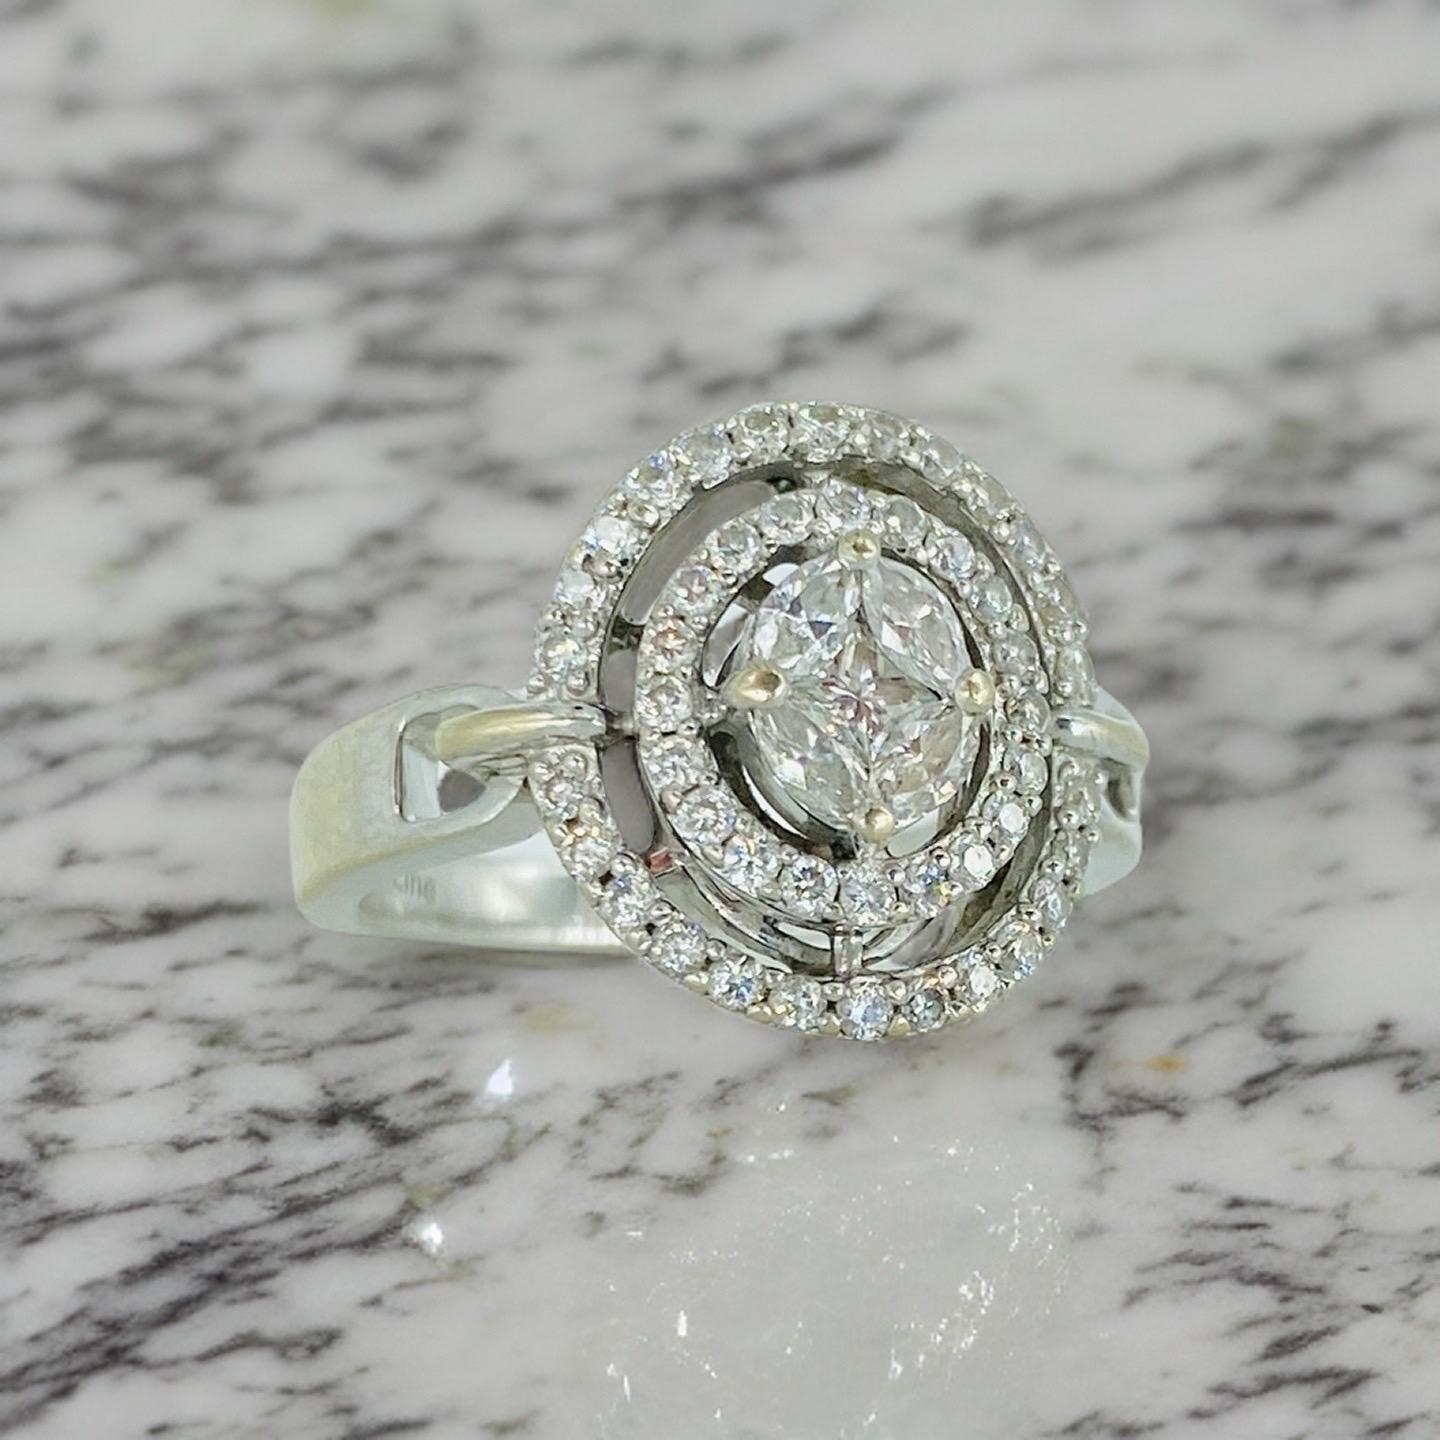 Diamond Line 0.71 Carat Diamond Double Halo Ring 18k White Gold. Extremely well-made with illusion stone settings that feature a center princess cut diamond surrounded by Marquise diamonds  cut diamonds and surrounded by double halo with round